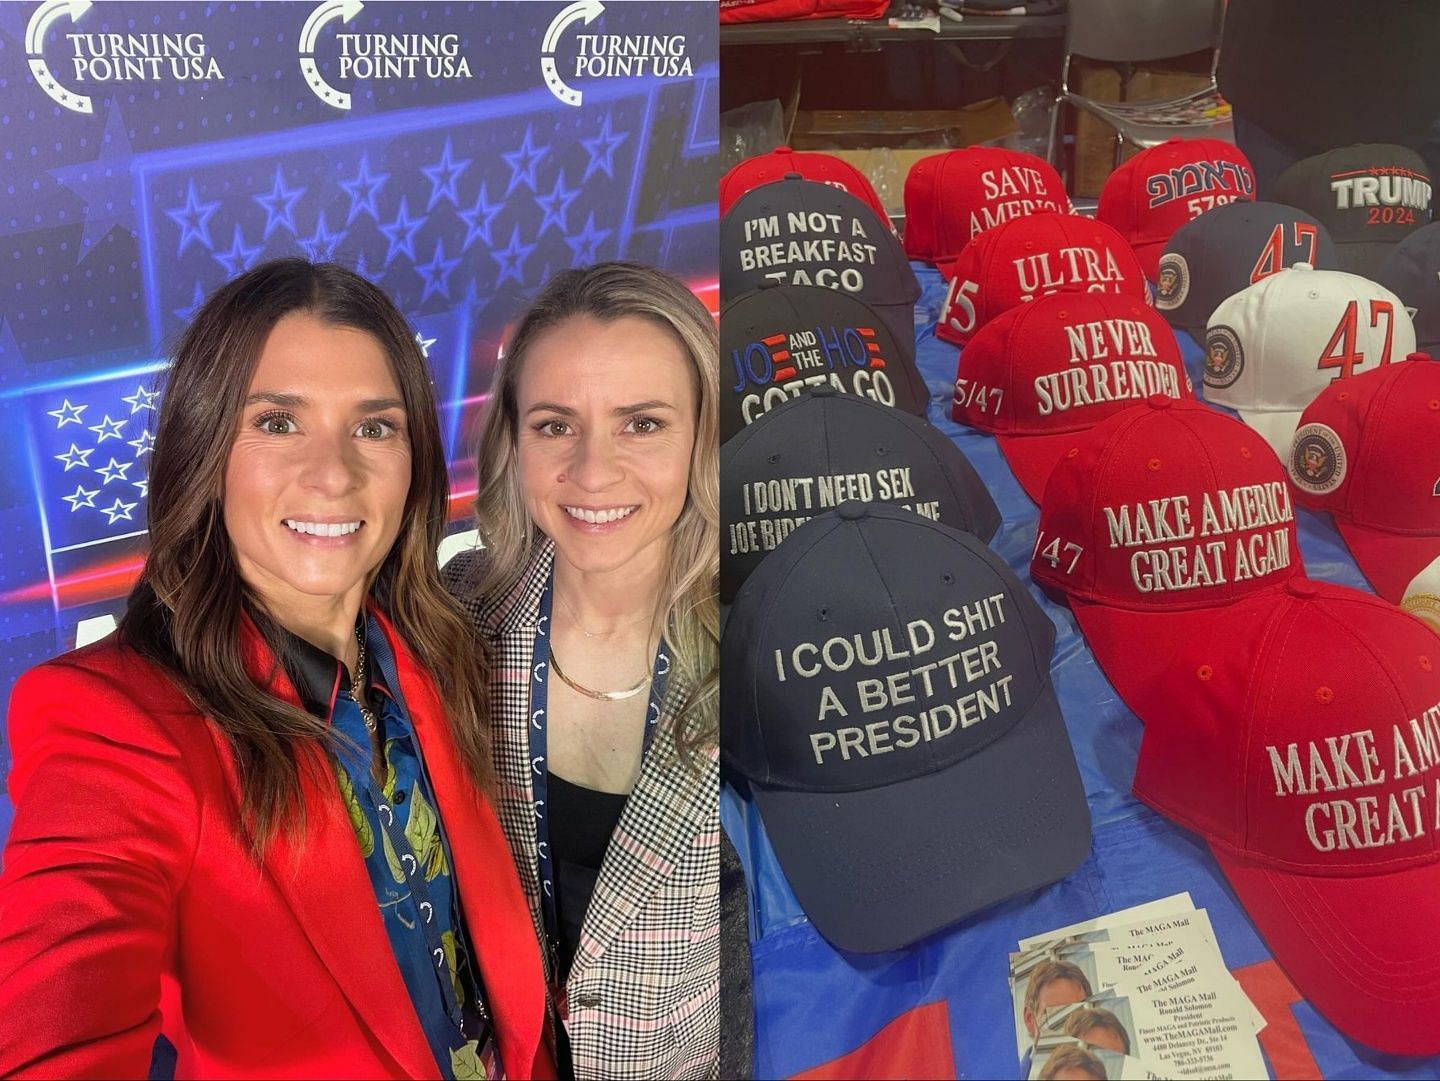 Danica Patrick attends TPUSA event (Images from Instagram)